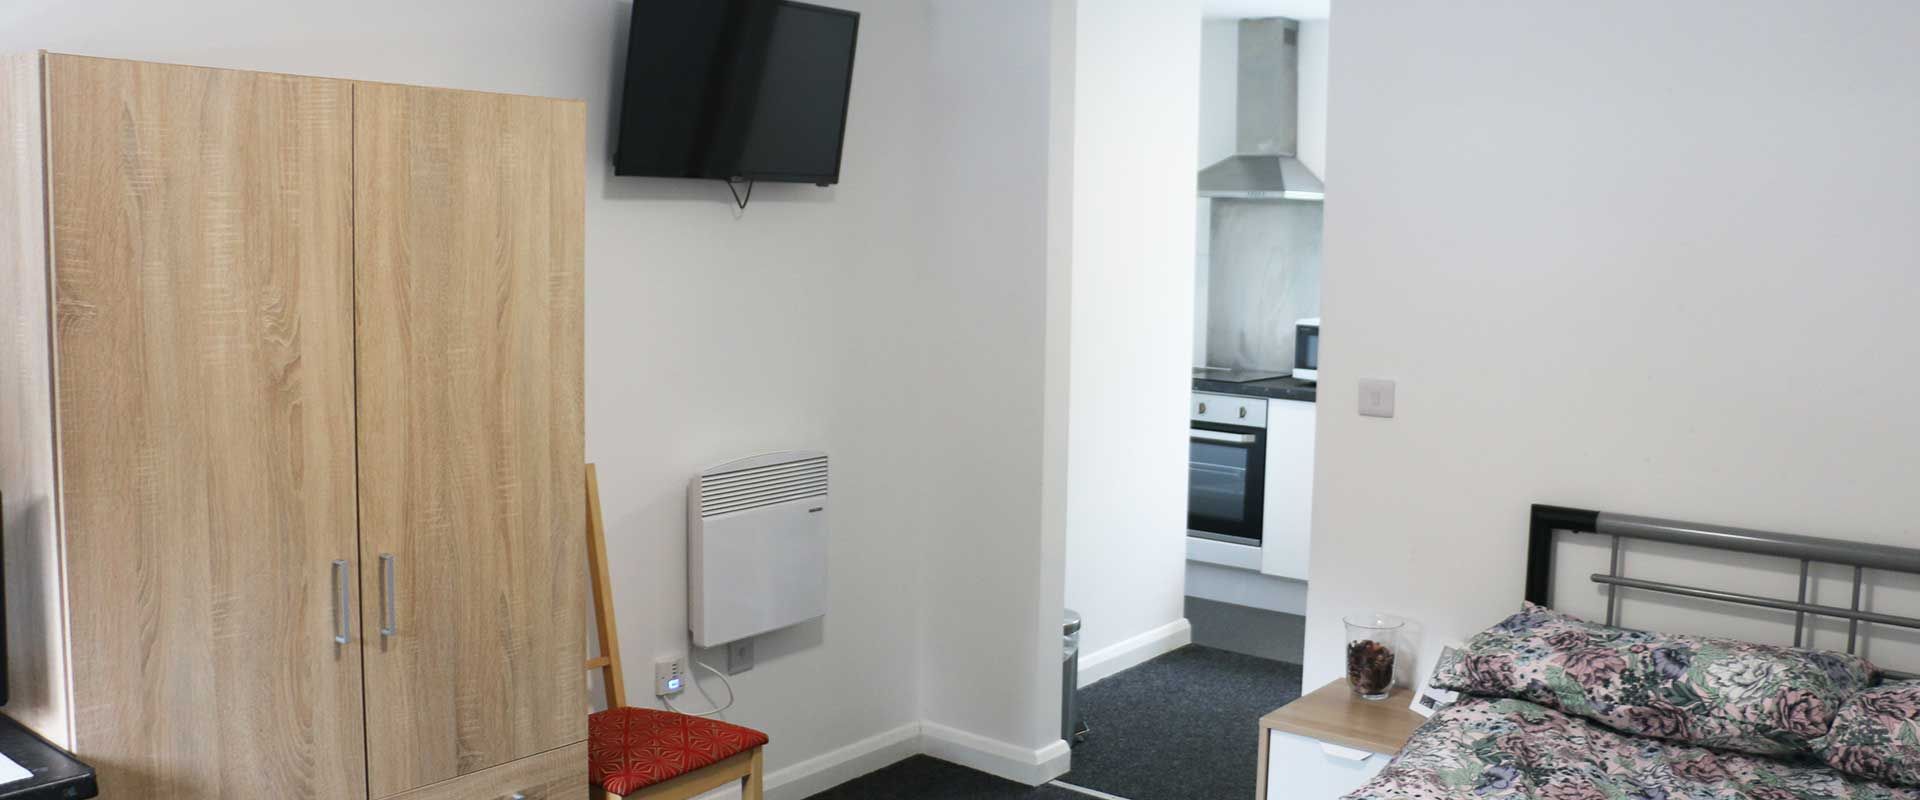 Forest Rise Loughborough Accommodation - Stylish rooms that come with flat screen TVs